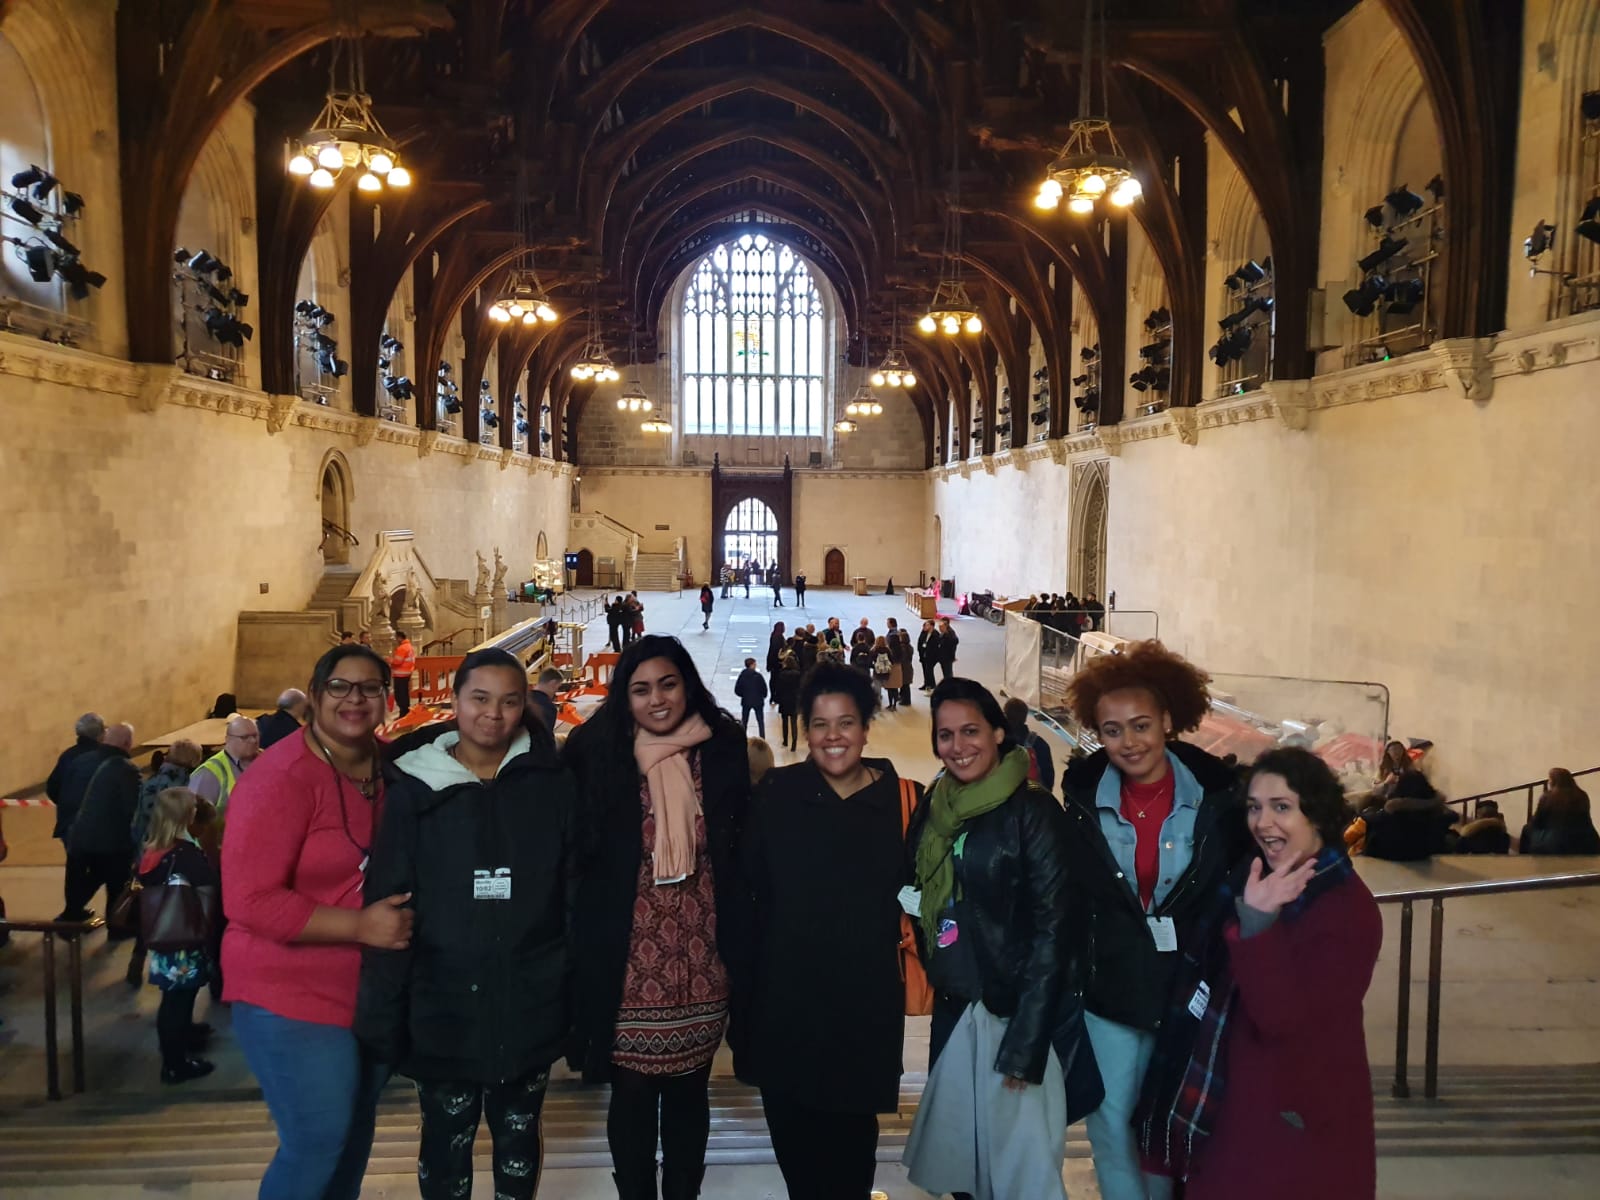 3) GirlForce Group at Palace of Westminster